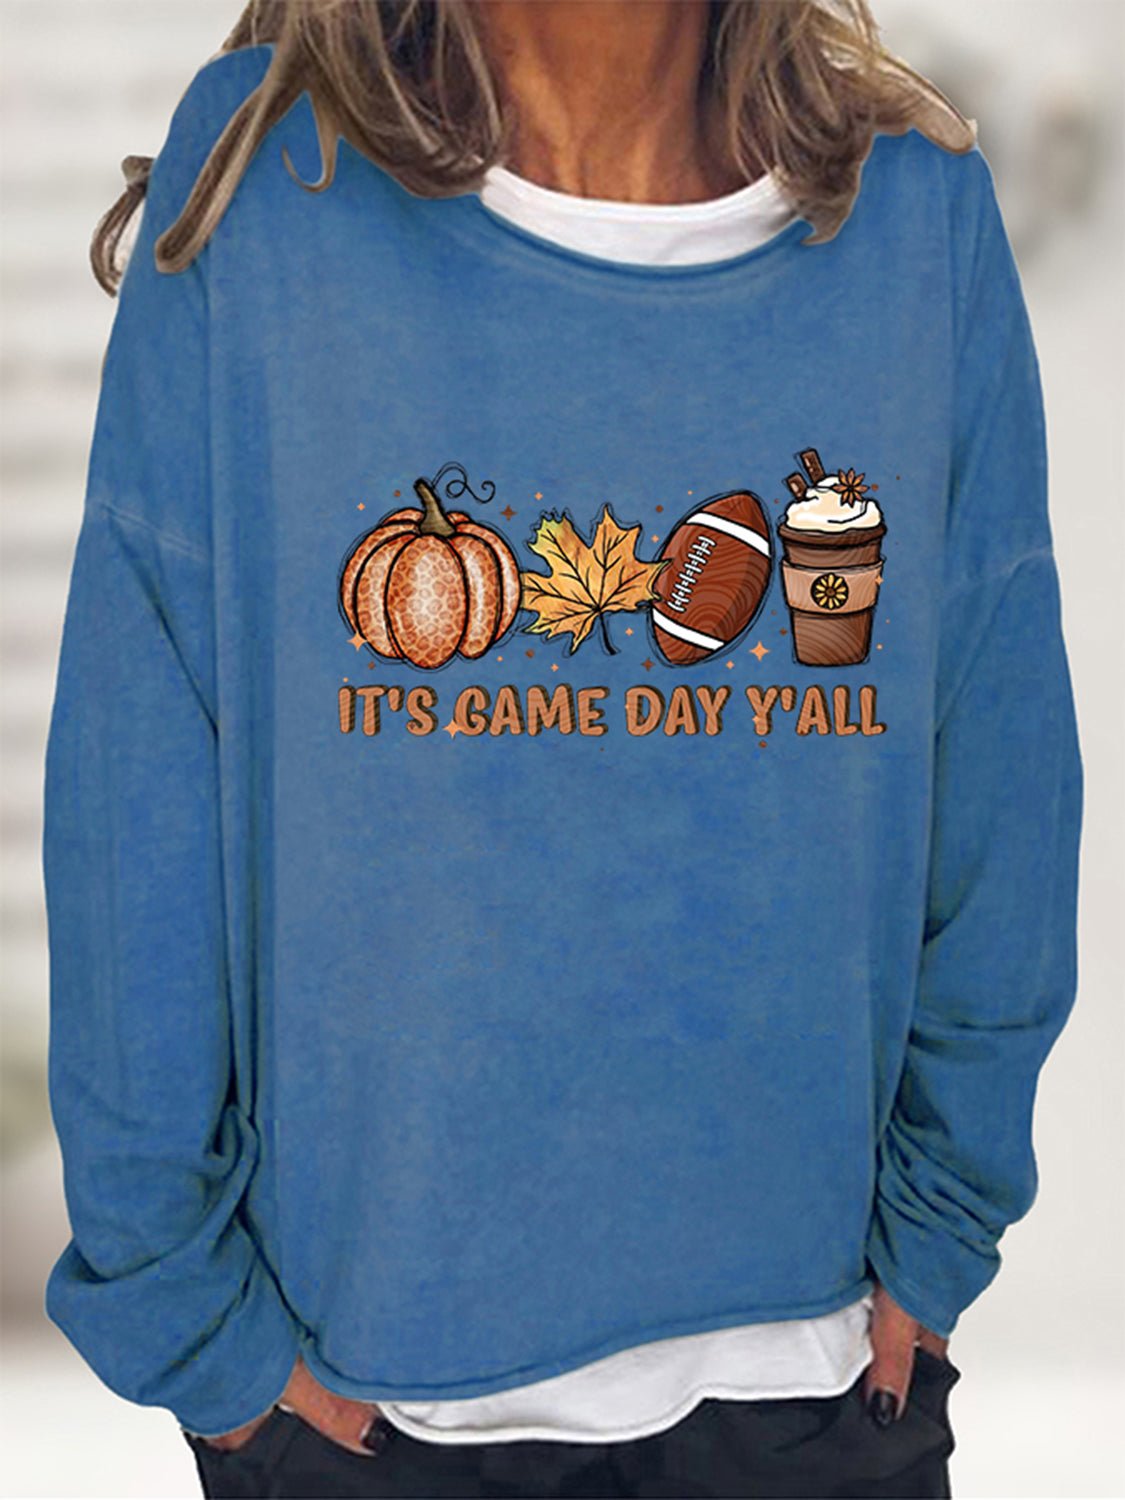 IT'S GAME DAY Y'ALL Graphic Sweatshirt - Global Village Kailua Boutique